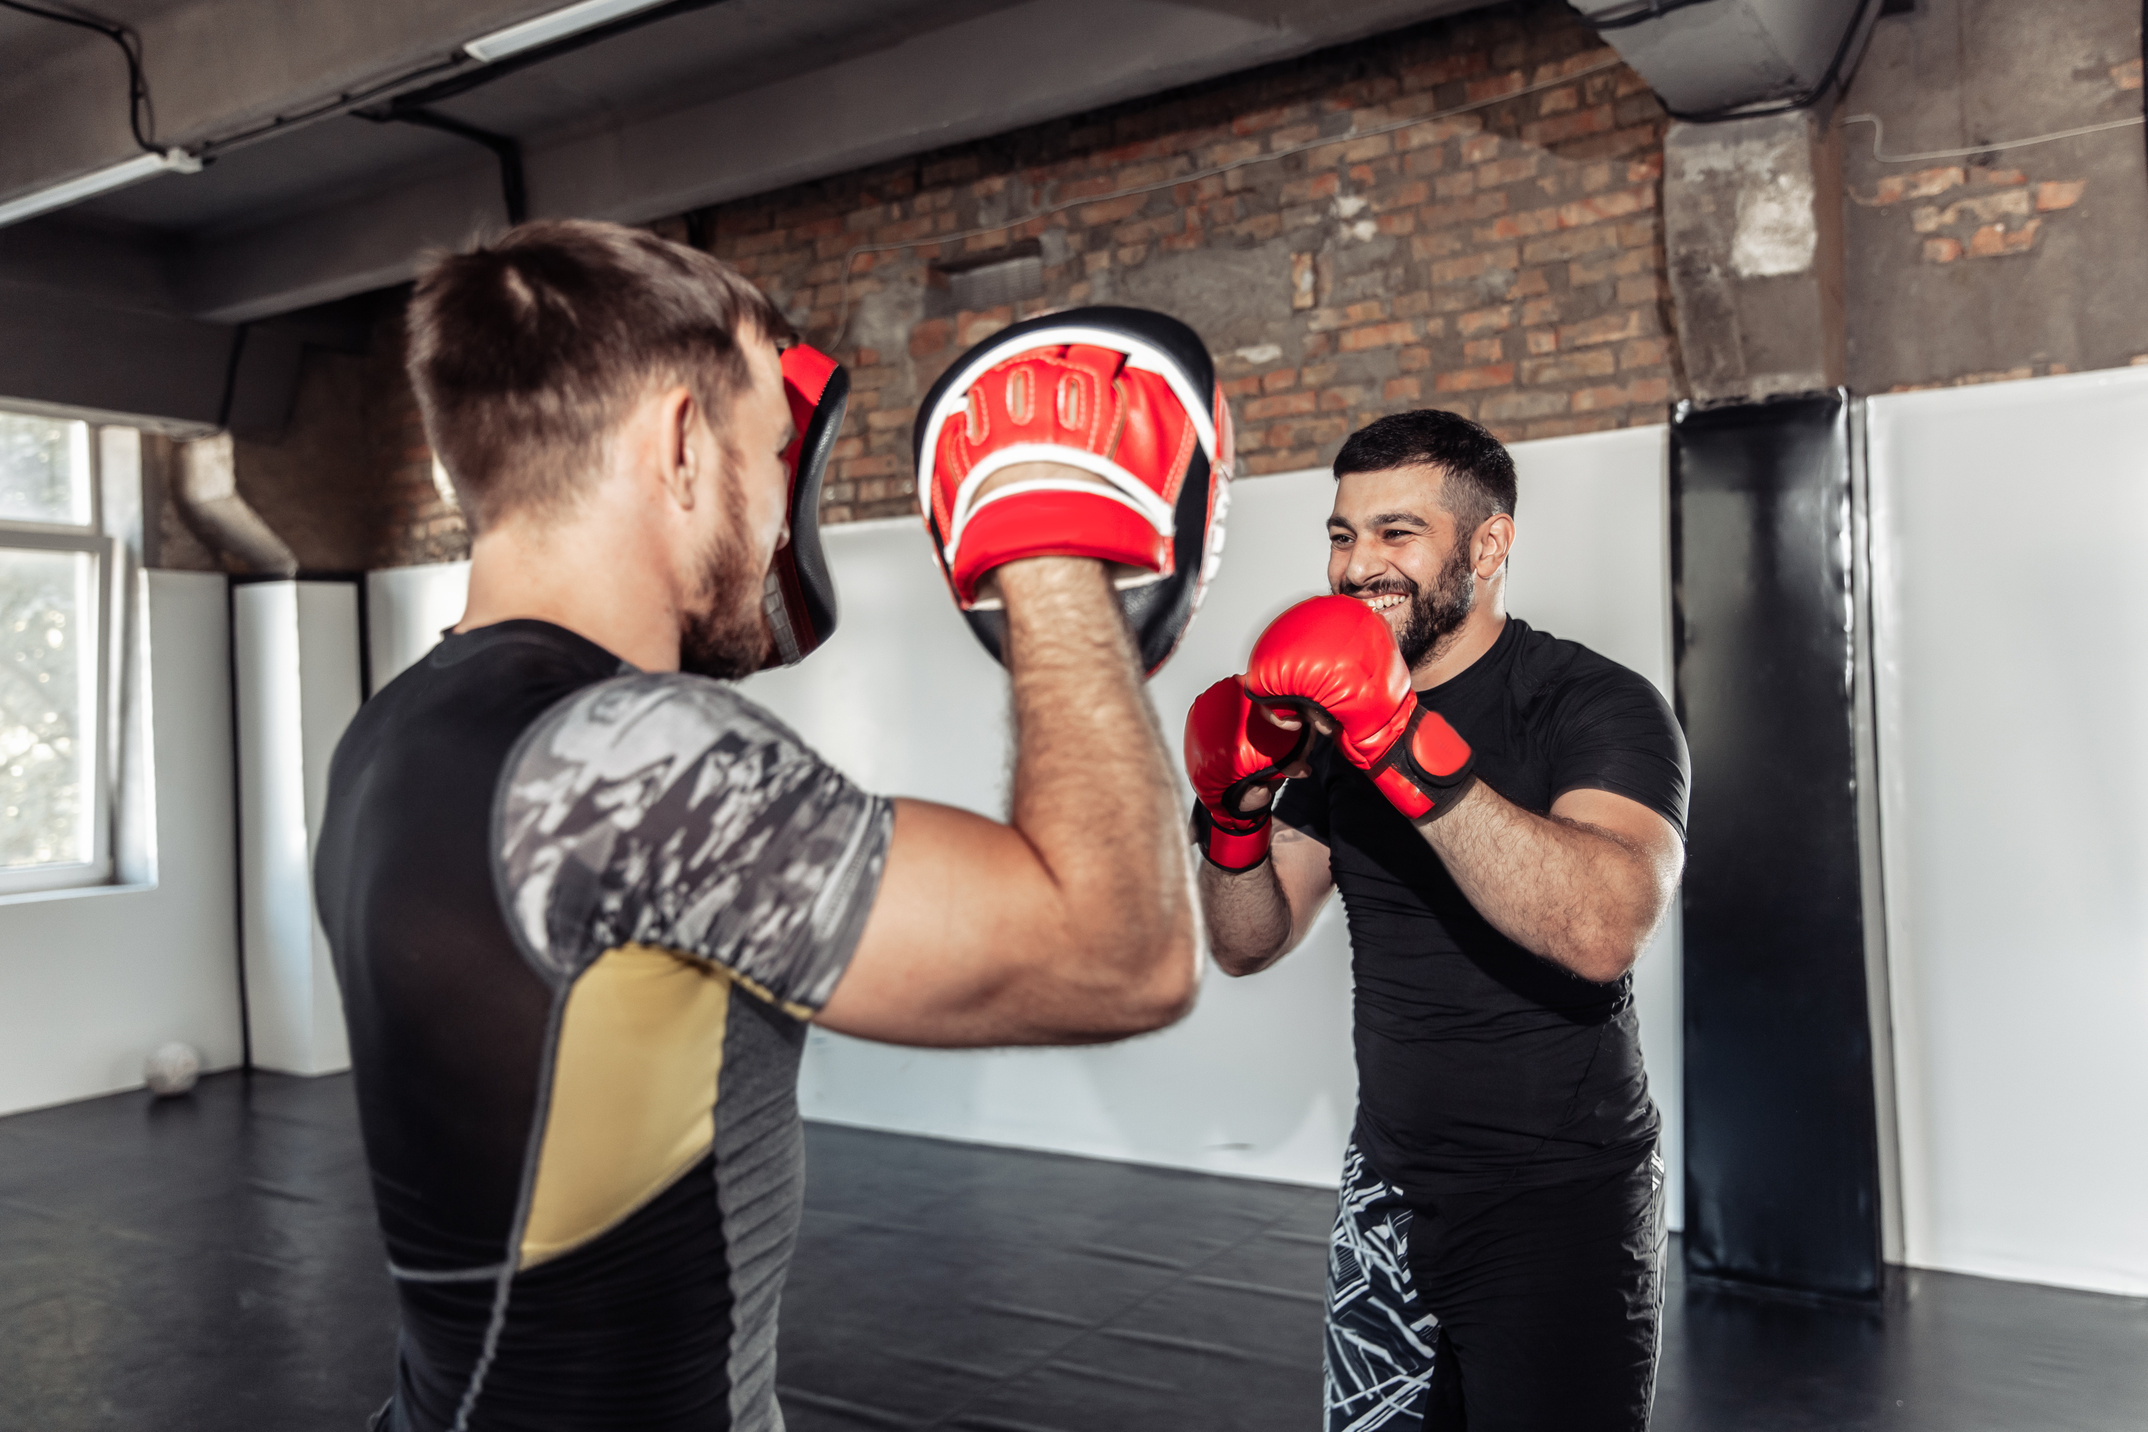 The Best Gloves For Kickboxing Class - Absolute MMA